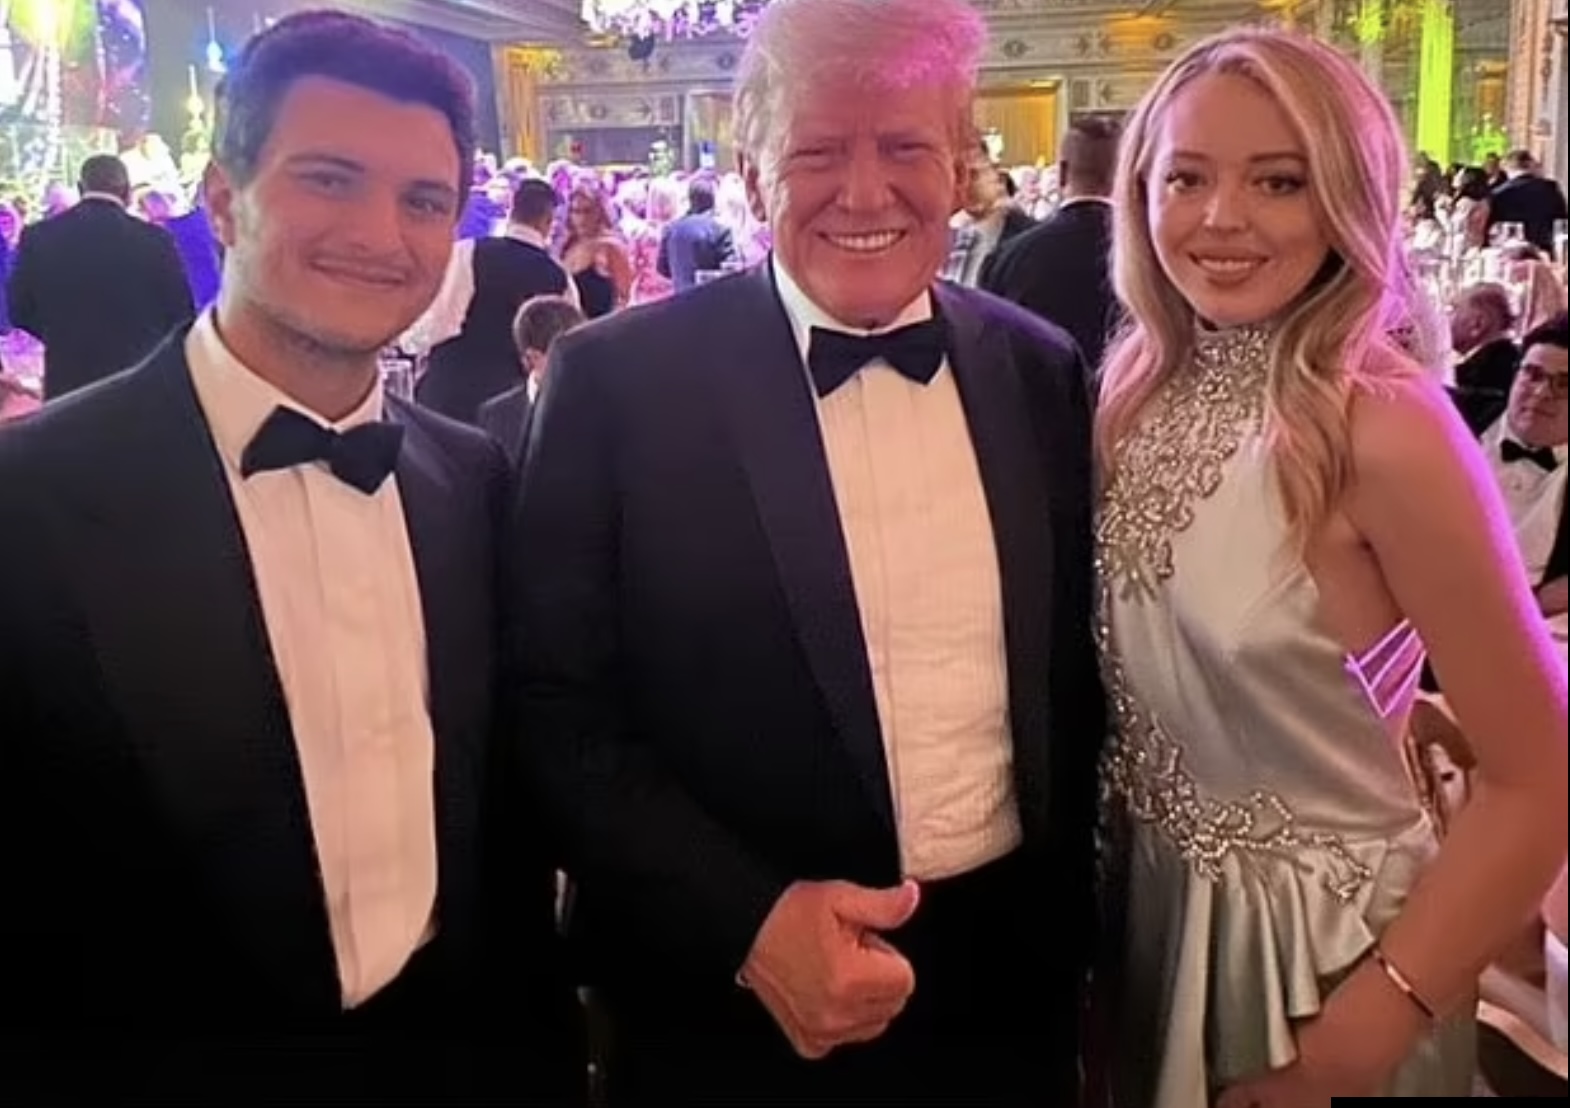 Tiffany Trump with dad Donald Trump and husband Michael Boulos at Mar-a-Lago New Year's party (Image: Instagram)